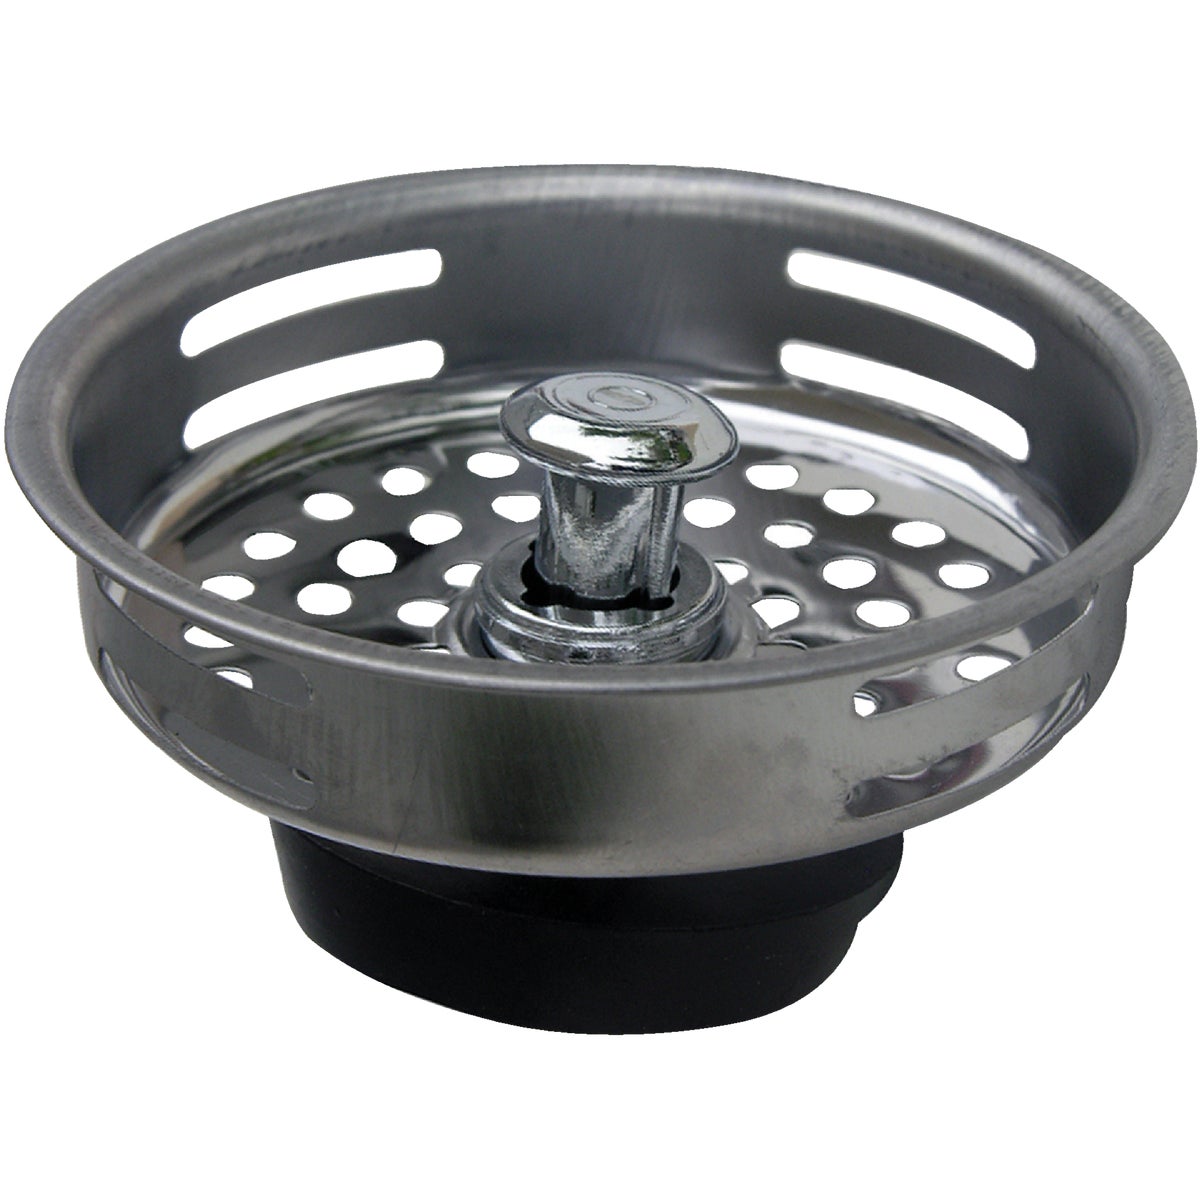 Lasco 3-3/8 In. Chrome Drop Post Style Duo Basket Strainer Stopper 